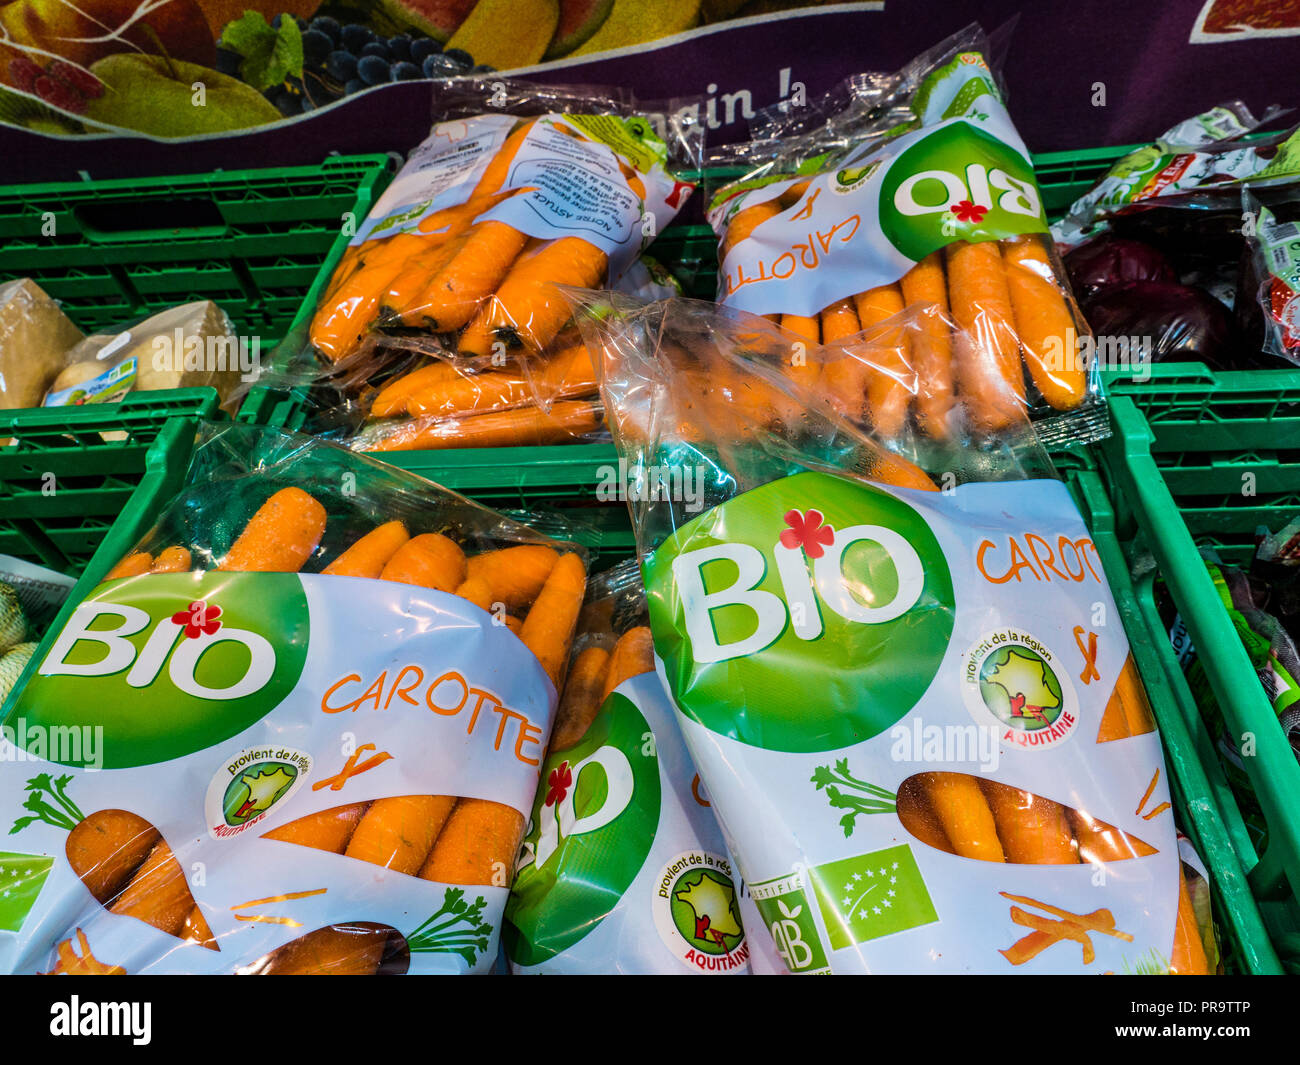 BIO Biodynamic organic carrots (carottes) packaged on display for sale in French Supermarket Stock Photo